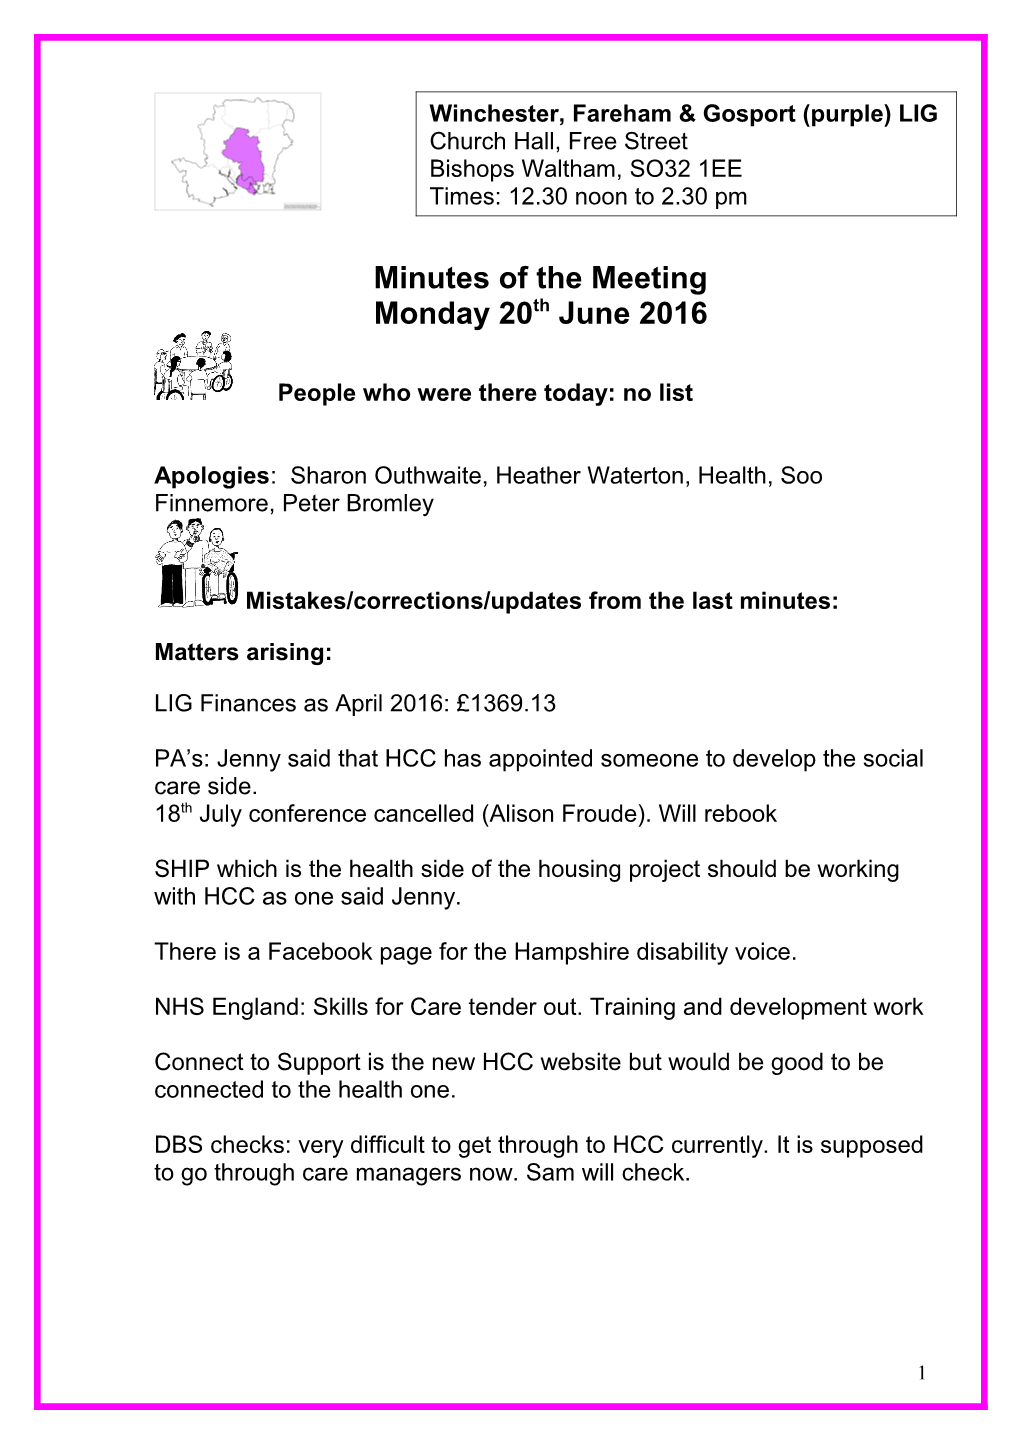 Minutes of the Meeting s18